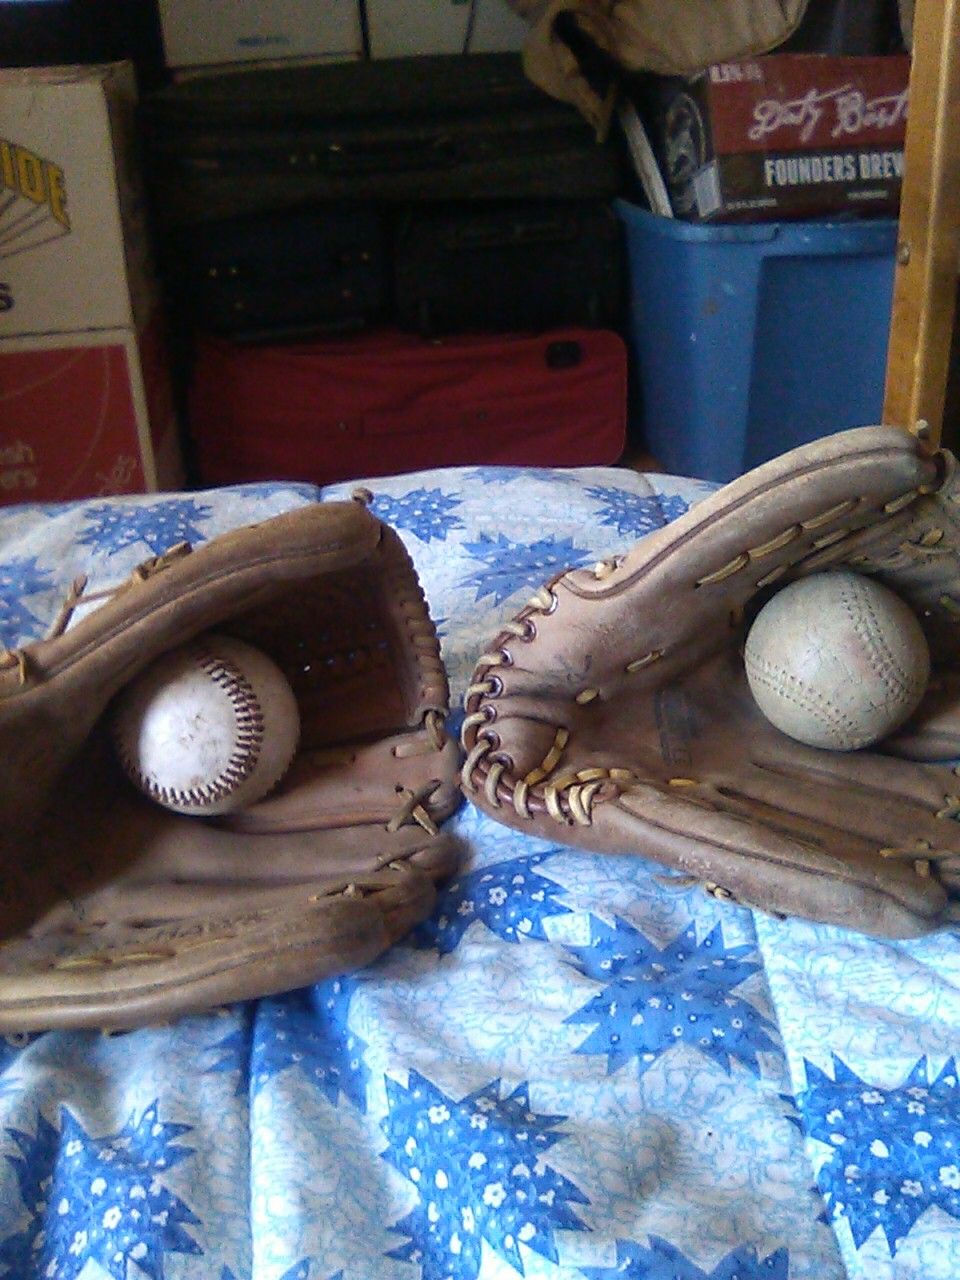 Lot Wilson ball hawk,and handicraft gloves,and 2vintage baseballs,some wear from use,still great condition.